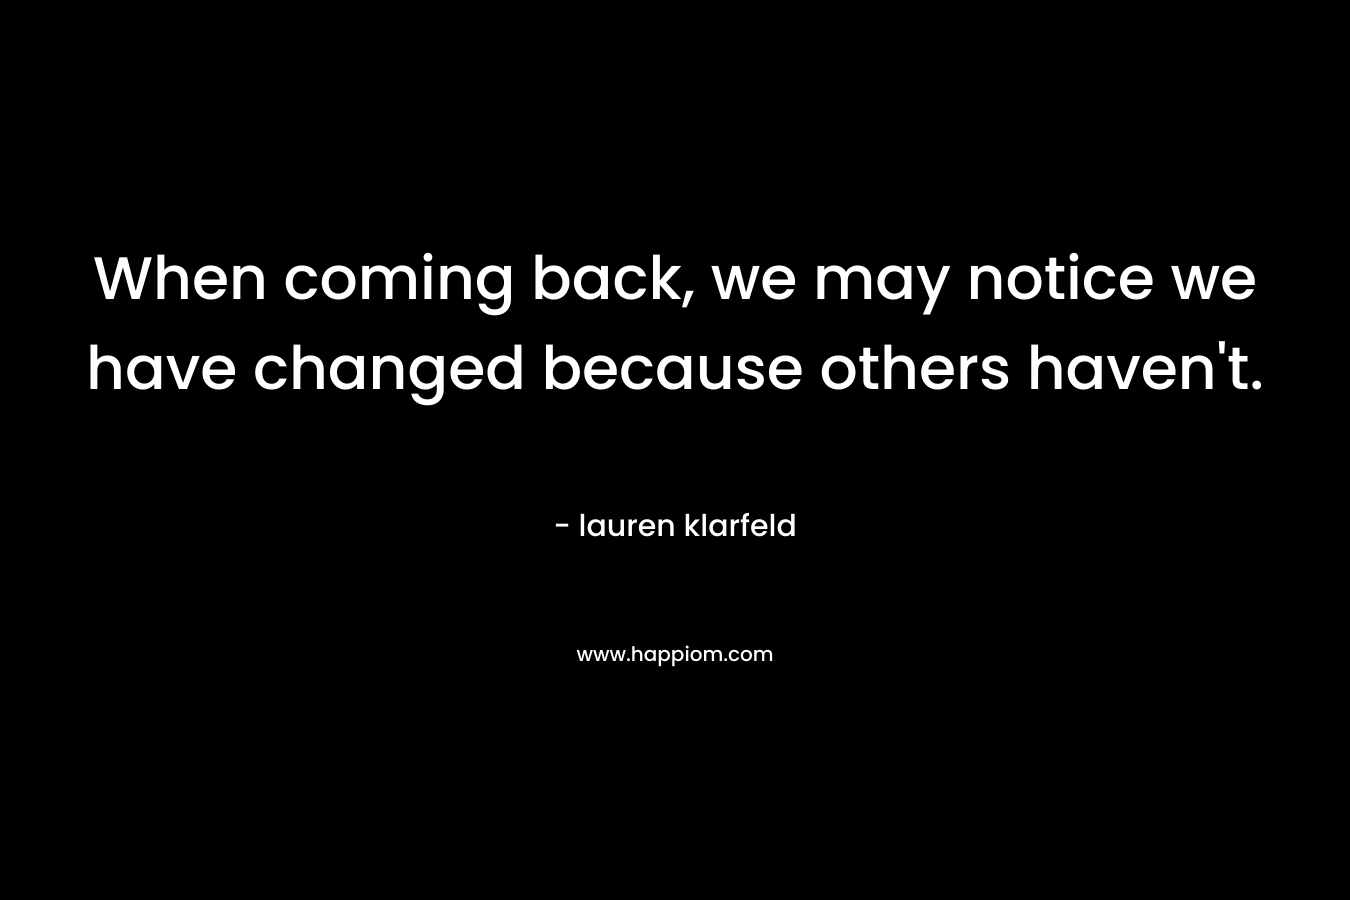 When coming back, we may notice we have changed because others haven’t. – lauren klarfeld